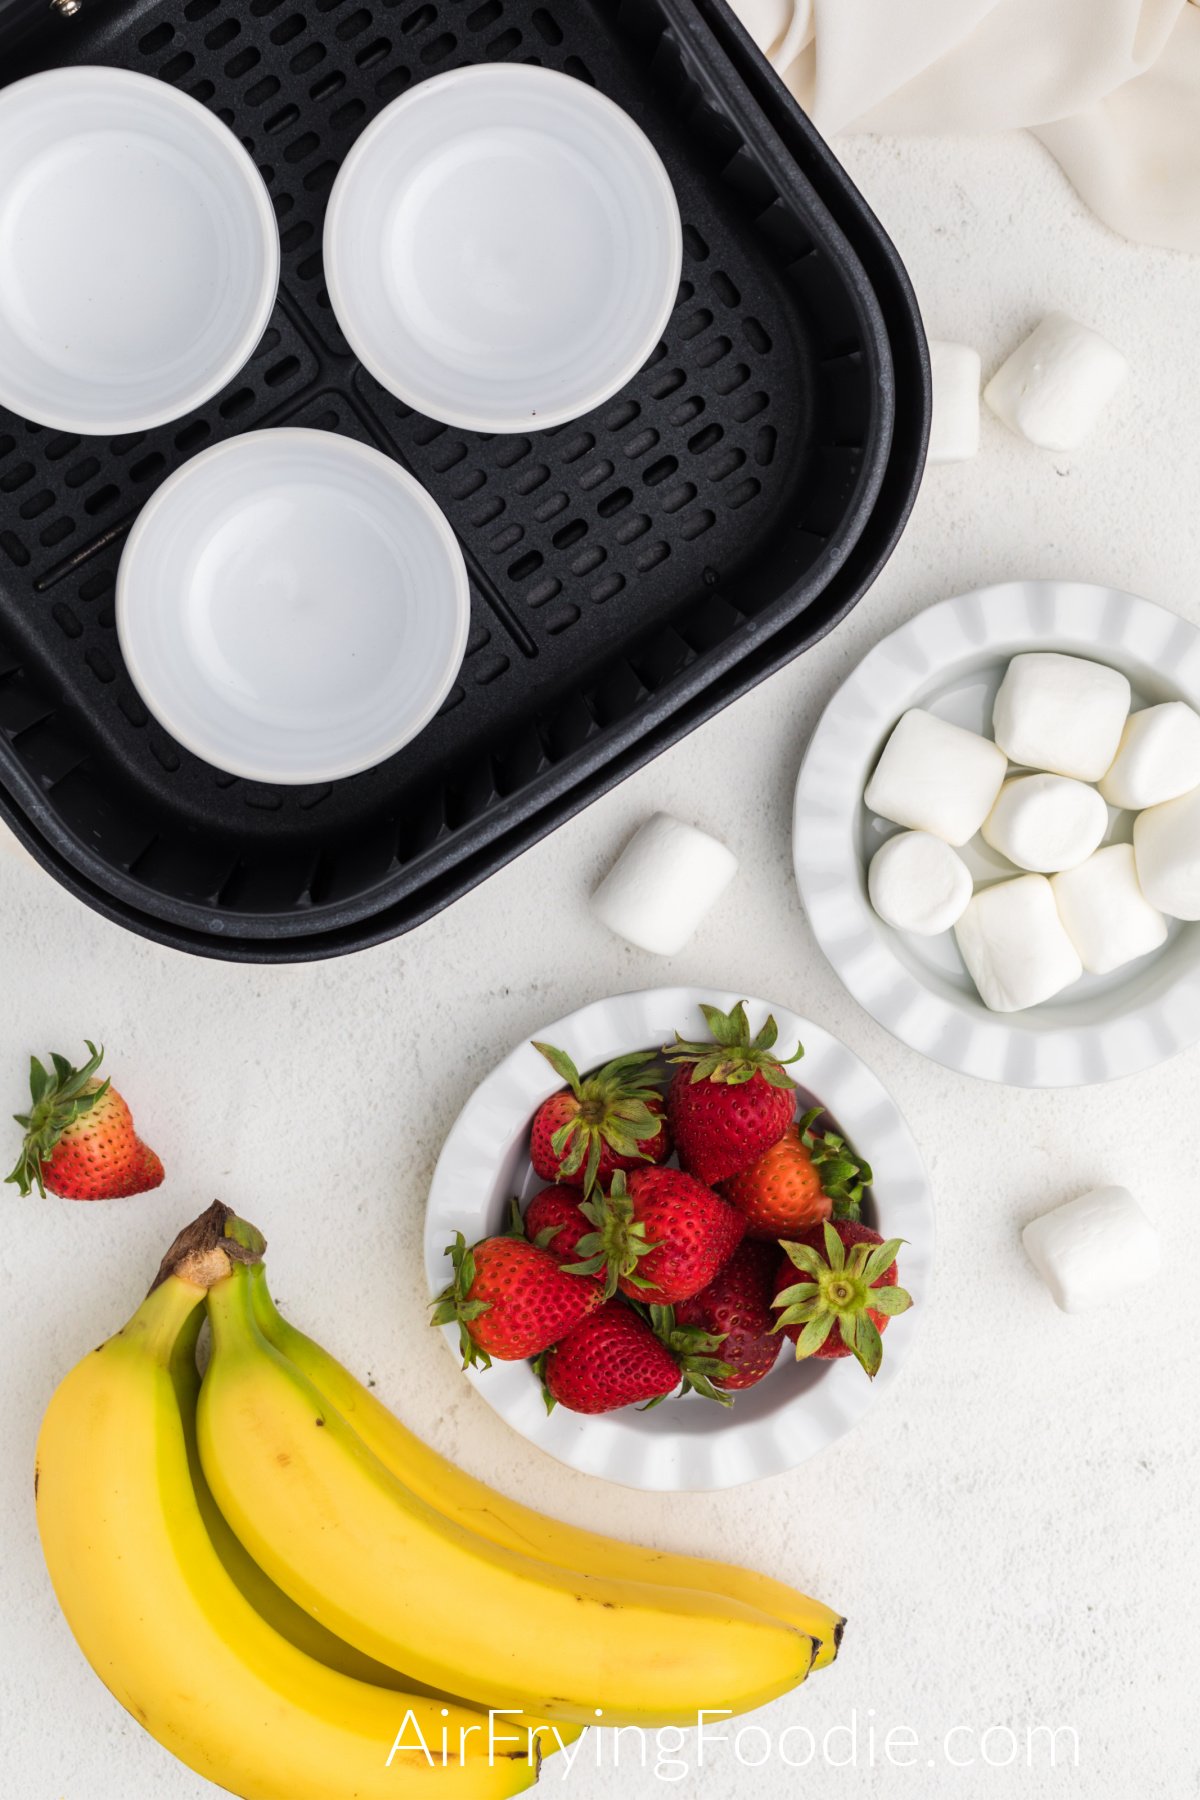 Air fryer basket with ramekins on a table with bananas, strawberries, and marshmallows.